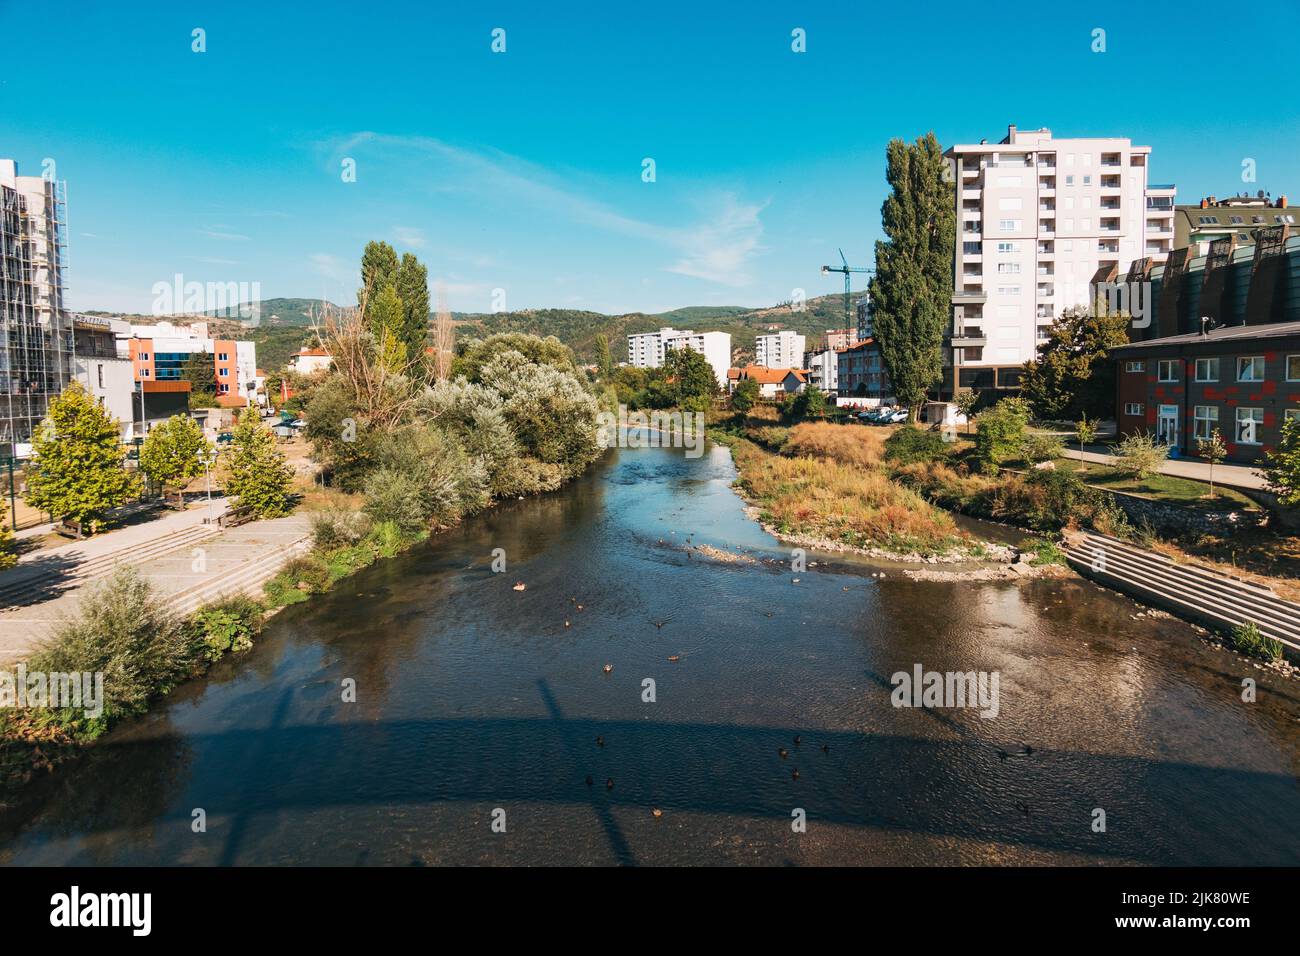 Looking over the Ibar river from the New Bridge in Mitrovica, Kosovo Stock Photo